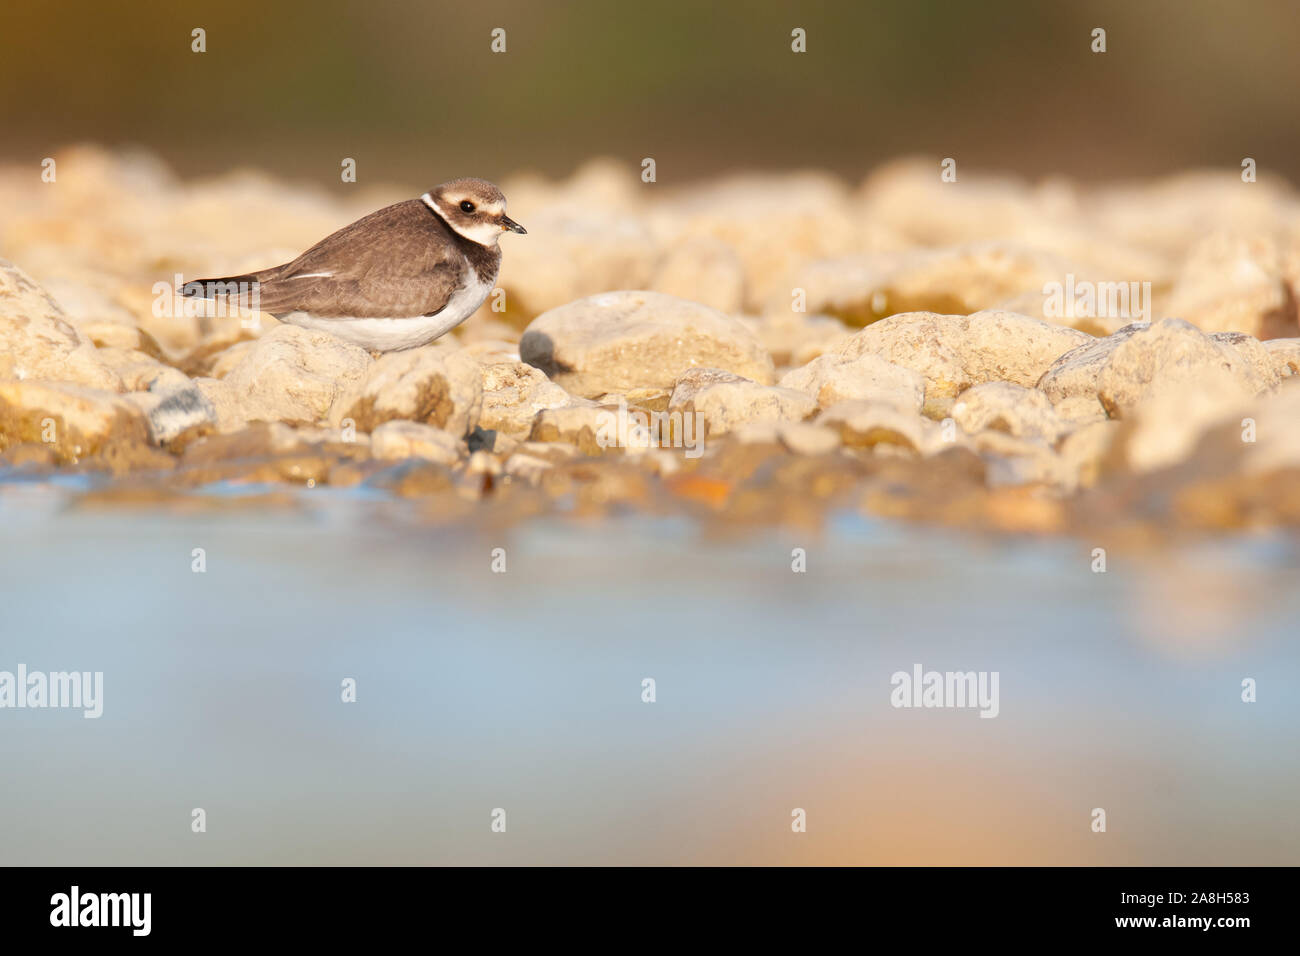 Common ringed plover or ringed plover (Charadrius hiaticula), a beautiful shore bird sitting by the shore of a pond, Czech Republic Stock Photo